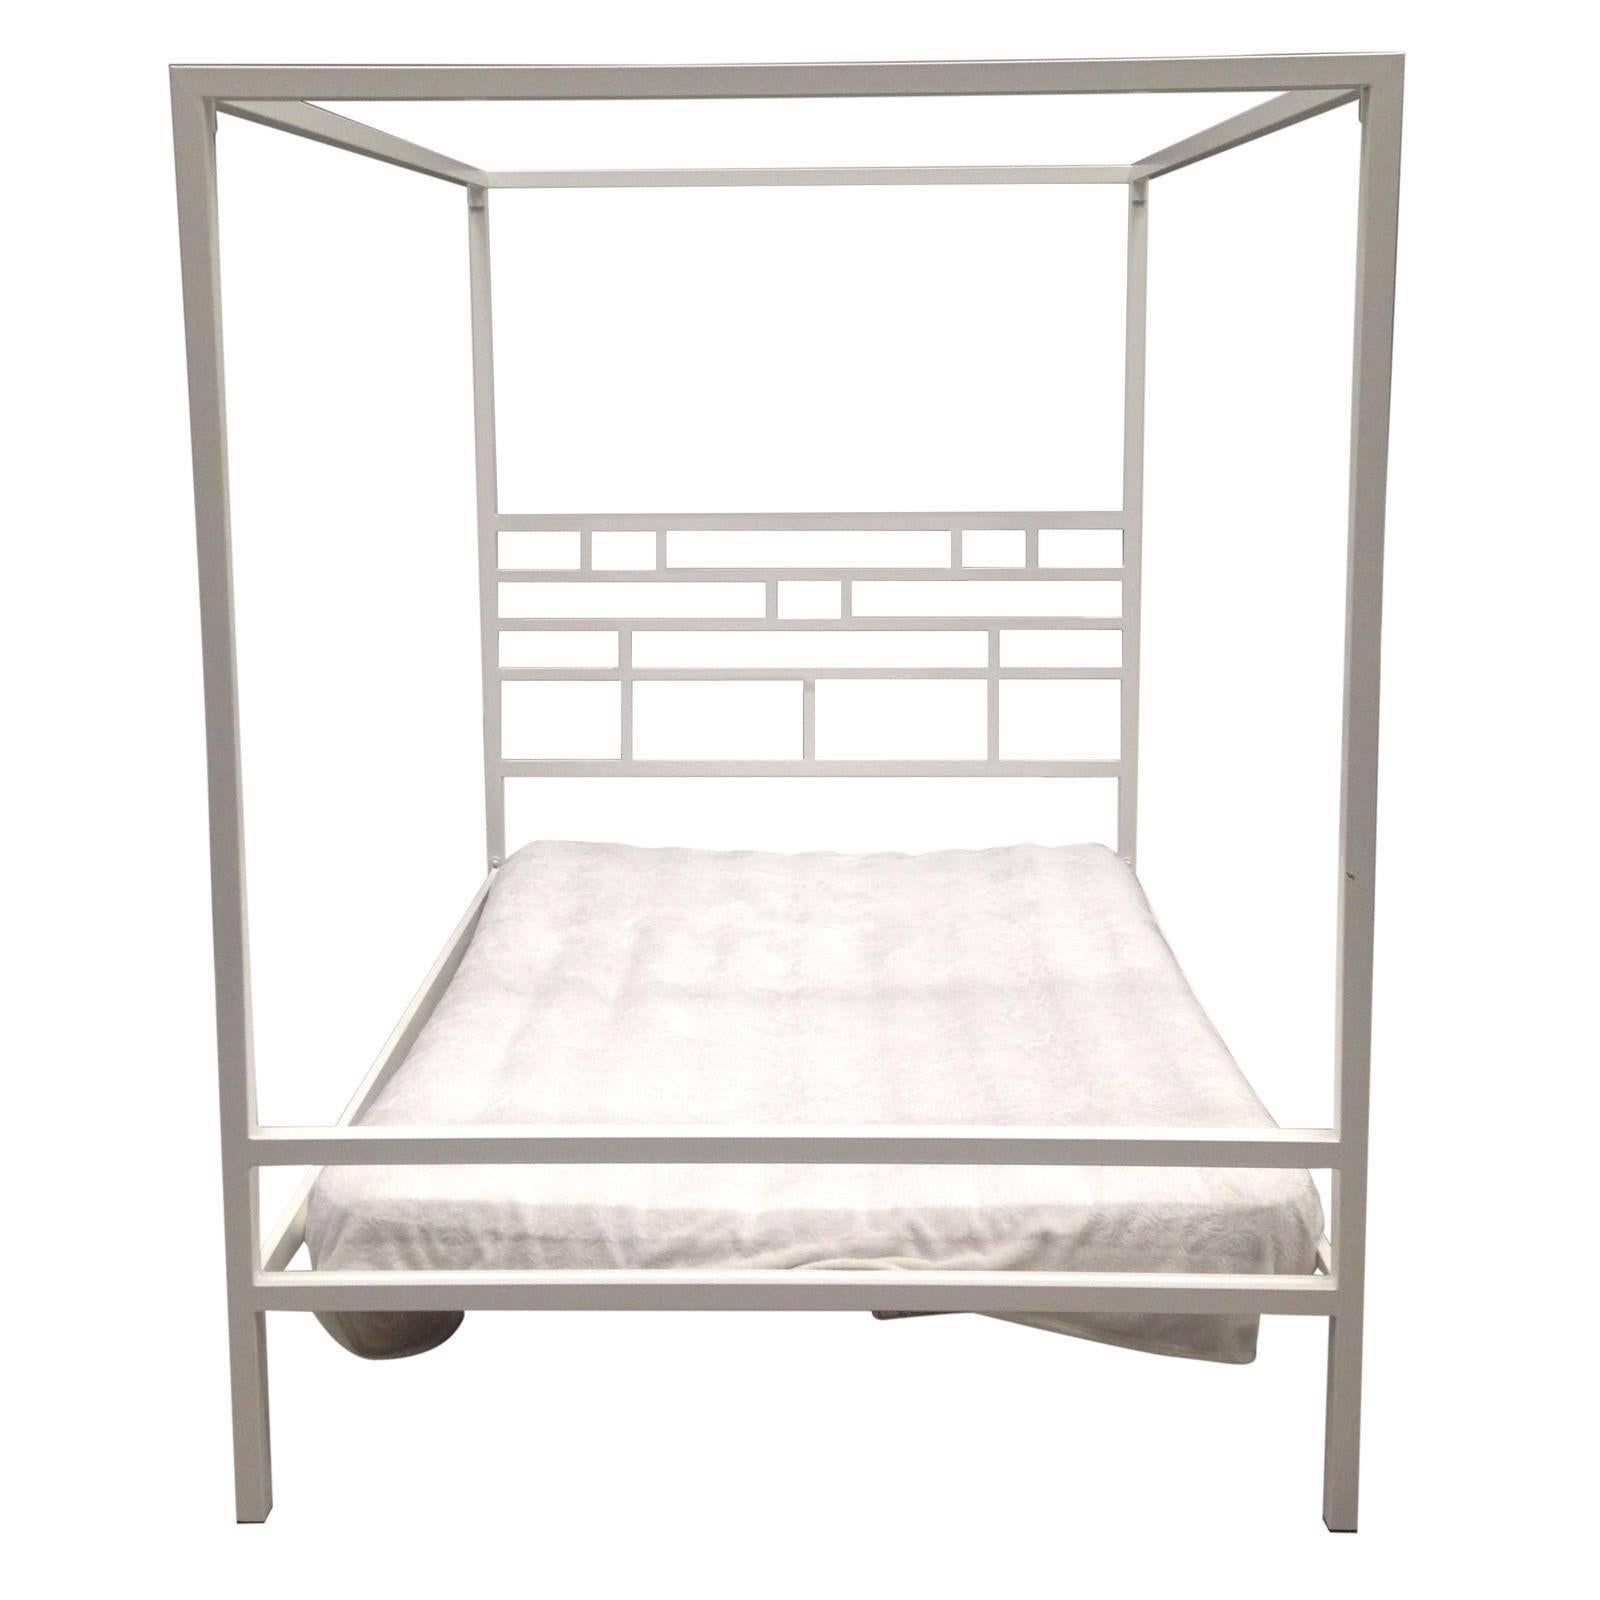 Four-Poster Canopy Bed or Daybed in Wrought Iron. Indoor & Outdoor For Sale